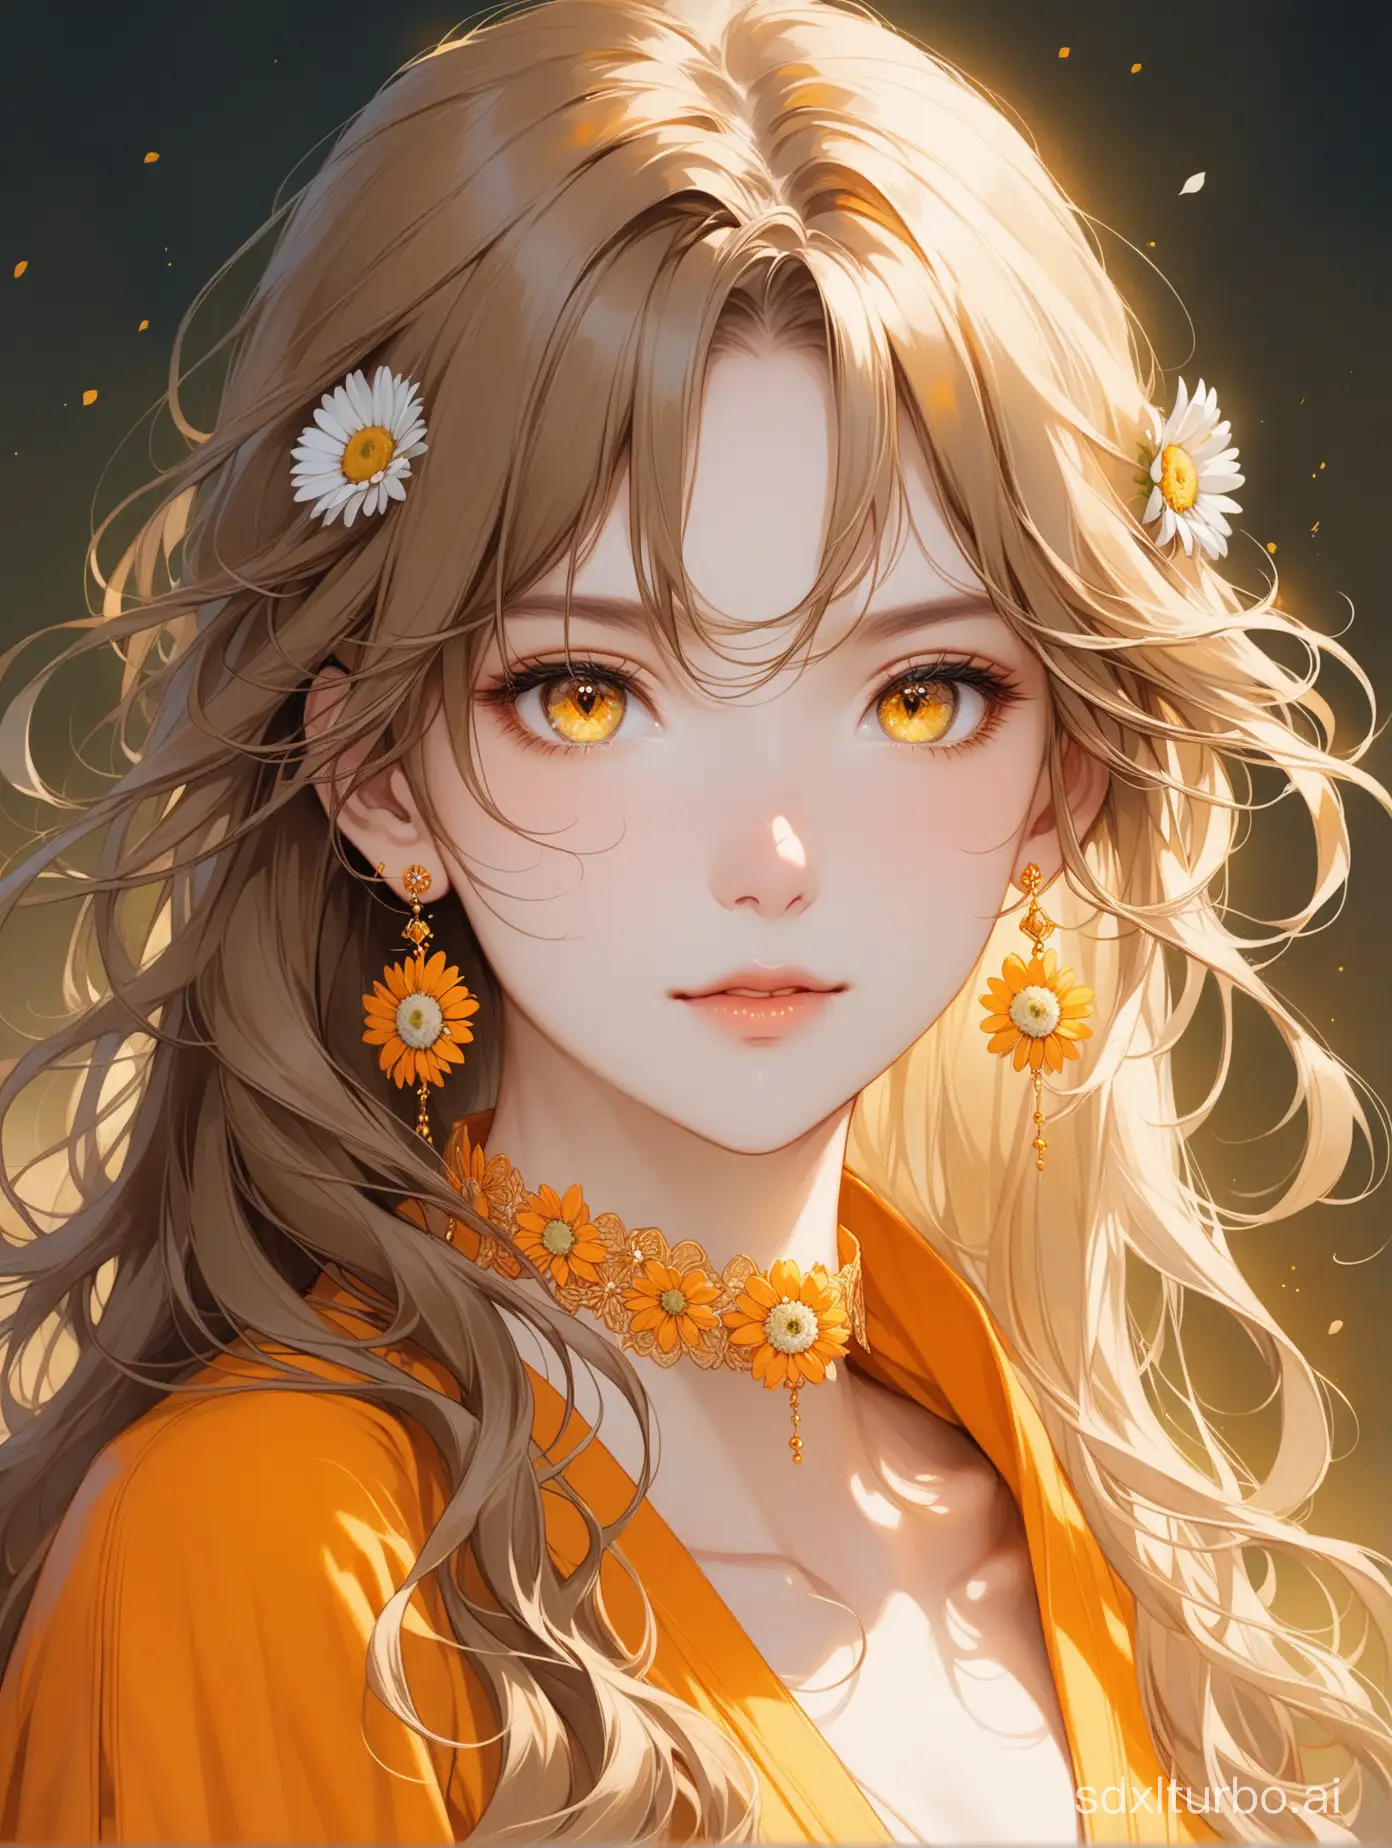 Top quality, masterpiece, a girl, light brown long hair, slightly curly hair ends, yellow earrings, neckband, (orange clothing), (exquisite hair depiction), (exquisite depiction of yellow eyes), (exquisite depiction of facial features), solo, (daisies), portrait description, sense of fragmentation